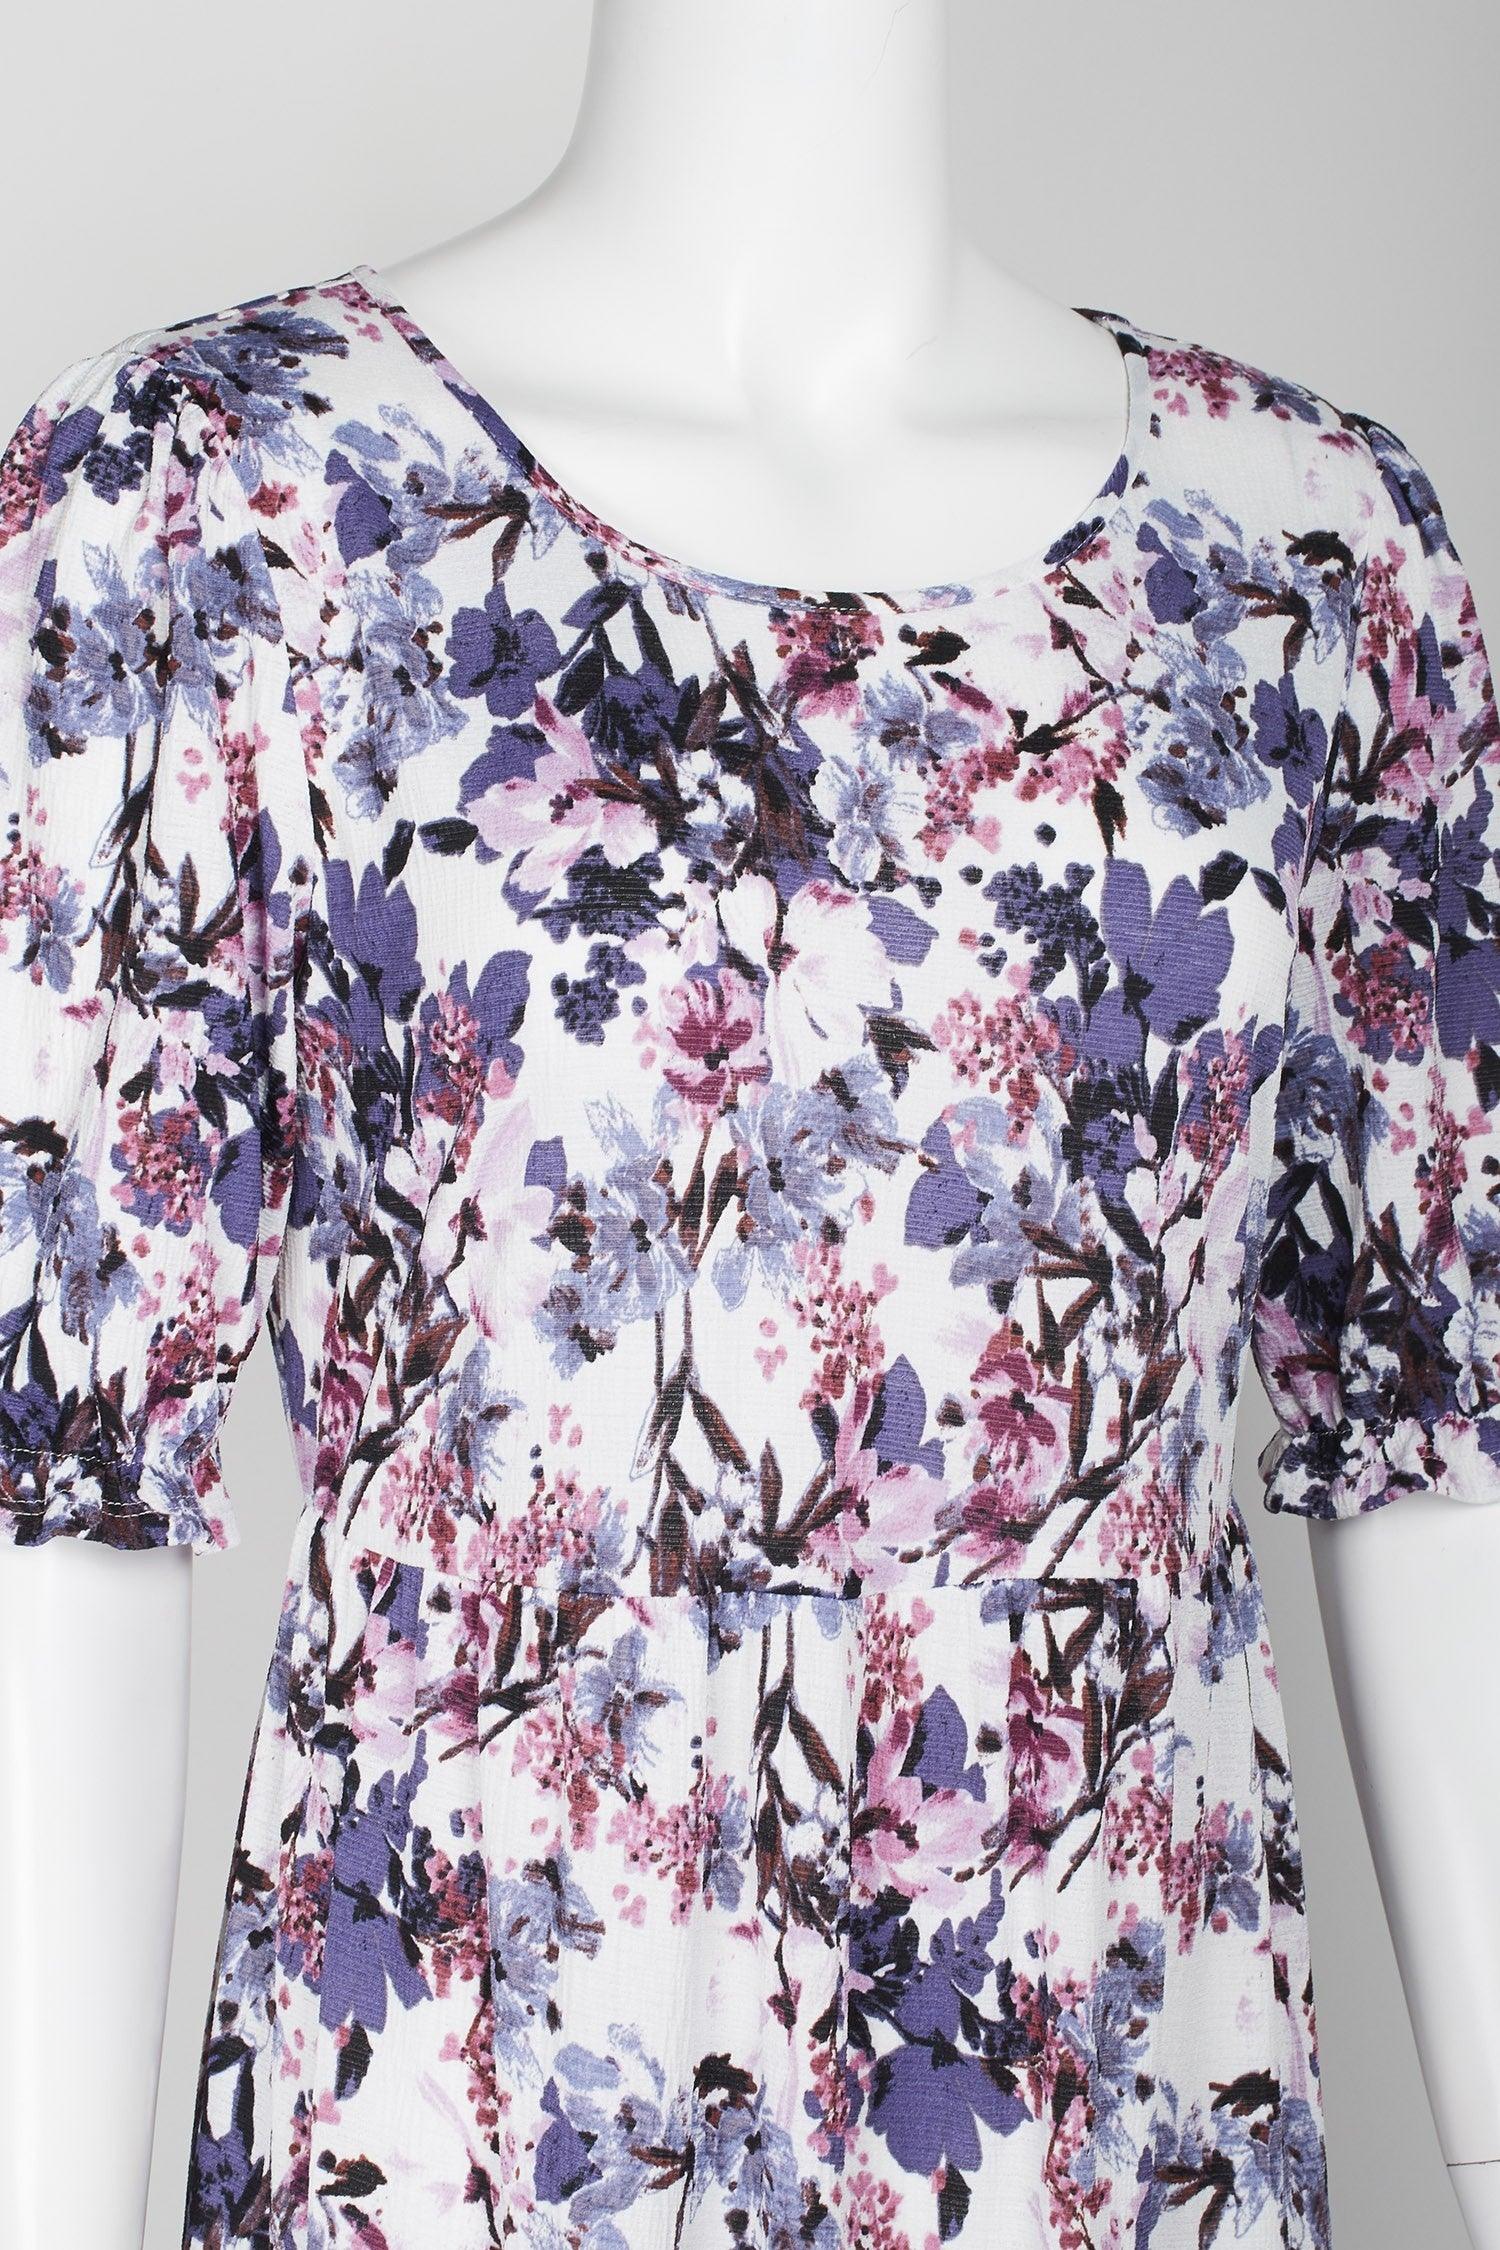 Connected Apparel Short Sleeve Floral Print Dress - The Dress Outlet